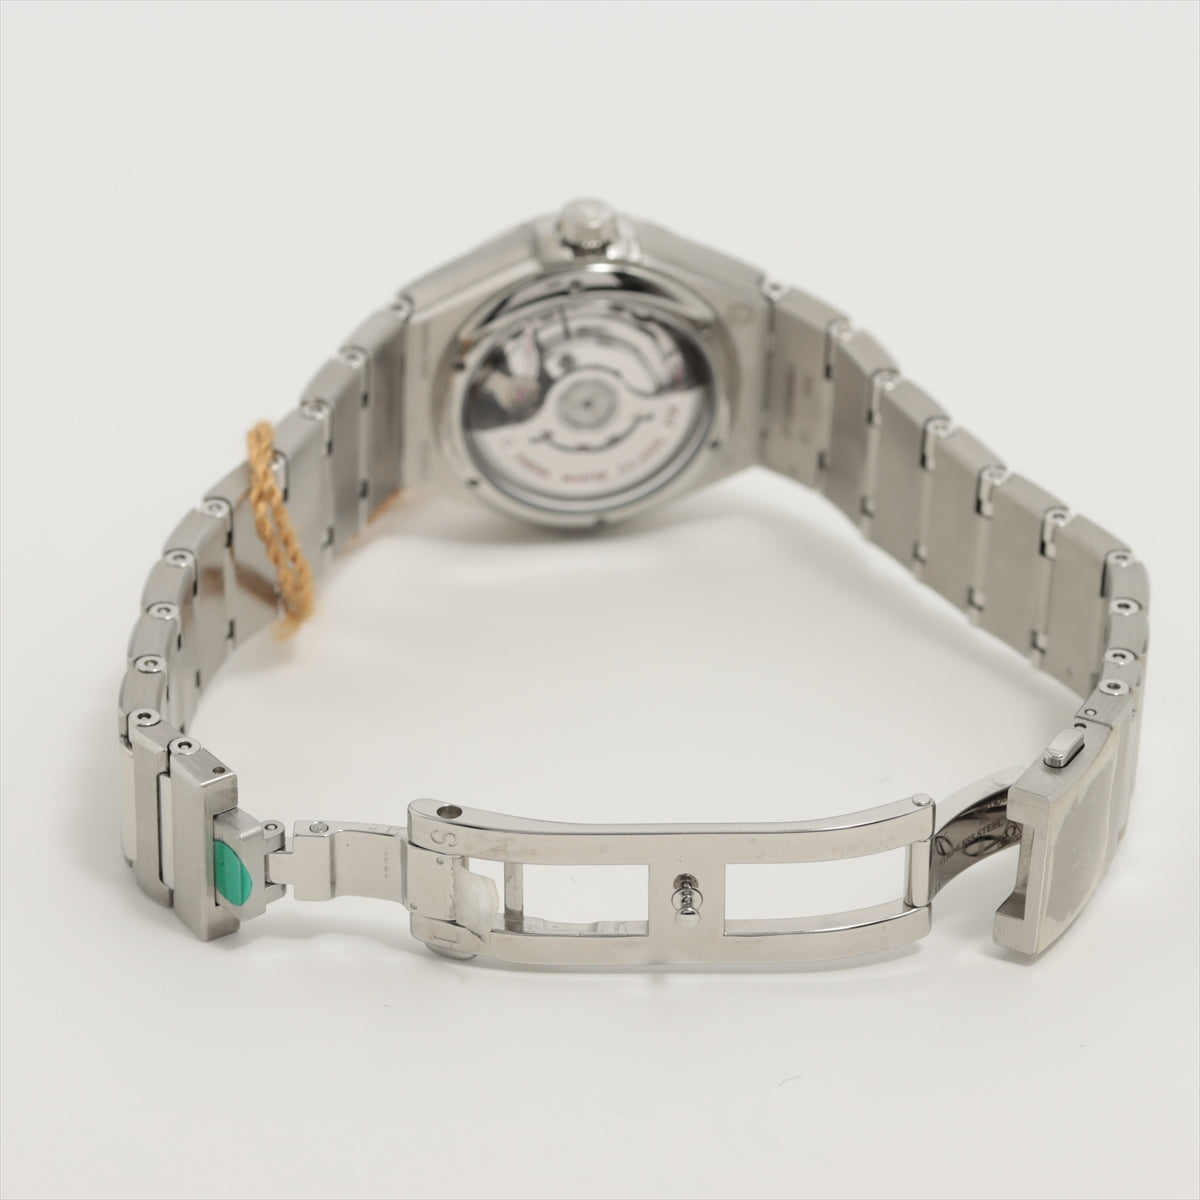 Omega Constellation 131.10.29.20.52.001 SS AT Silver-Face